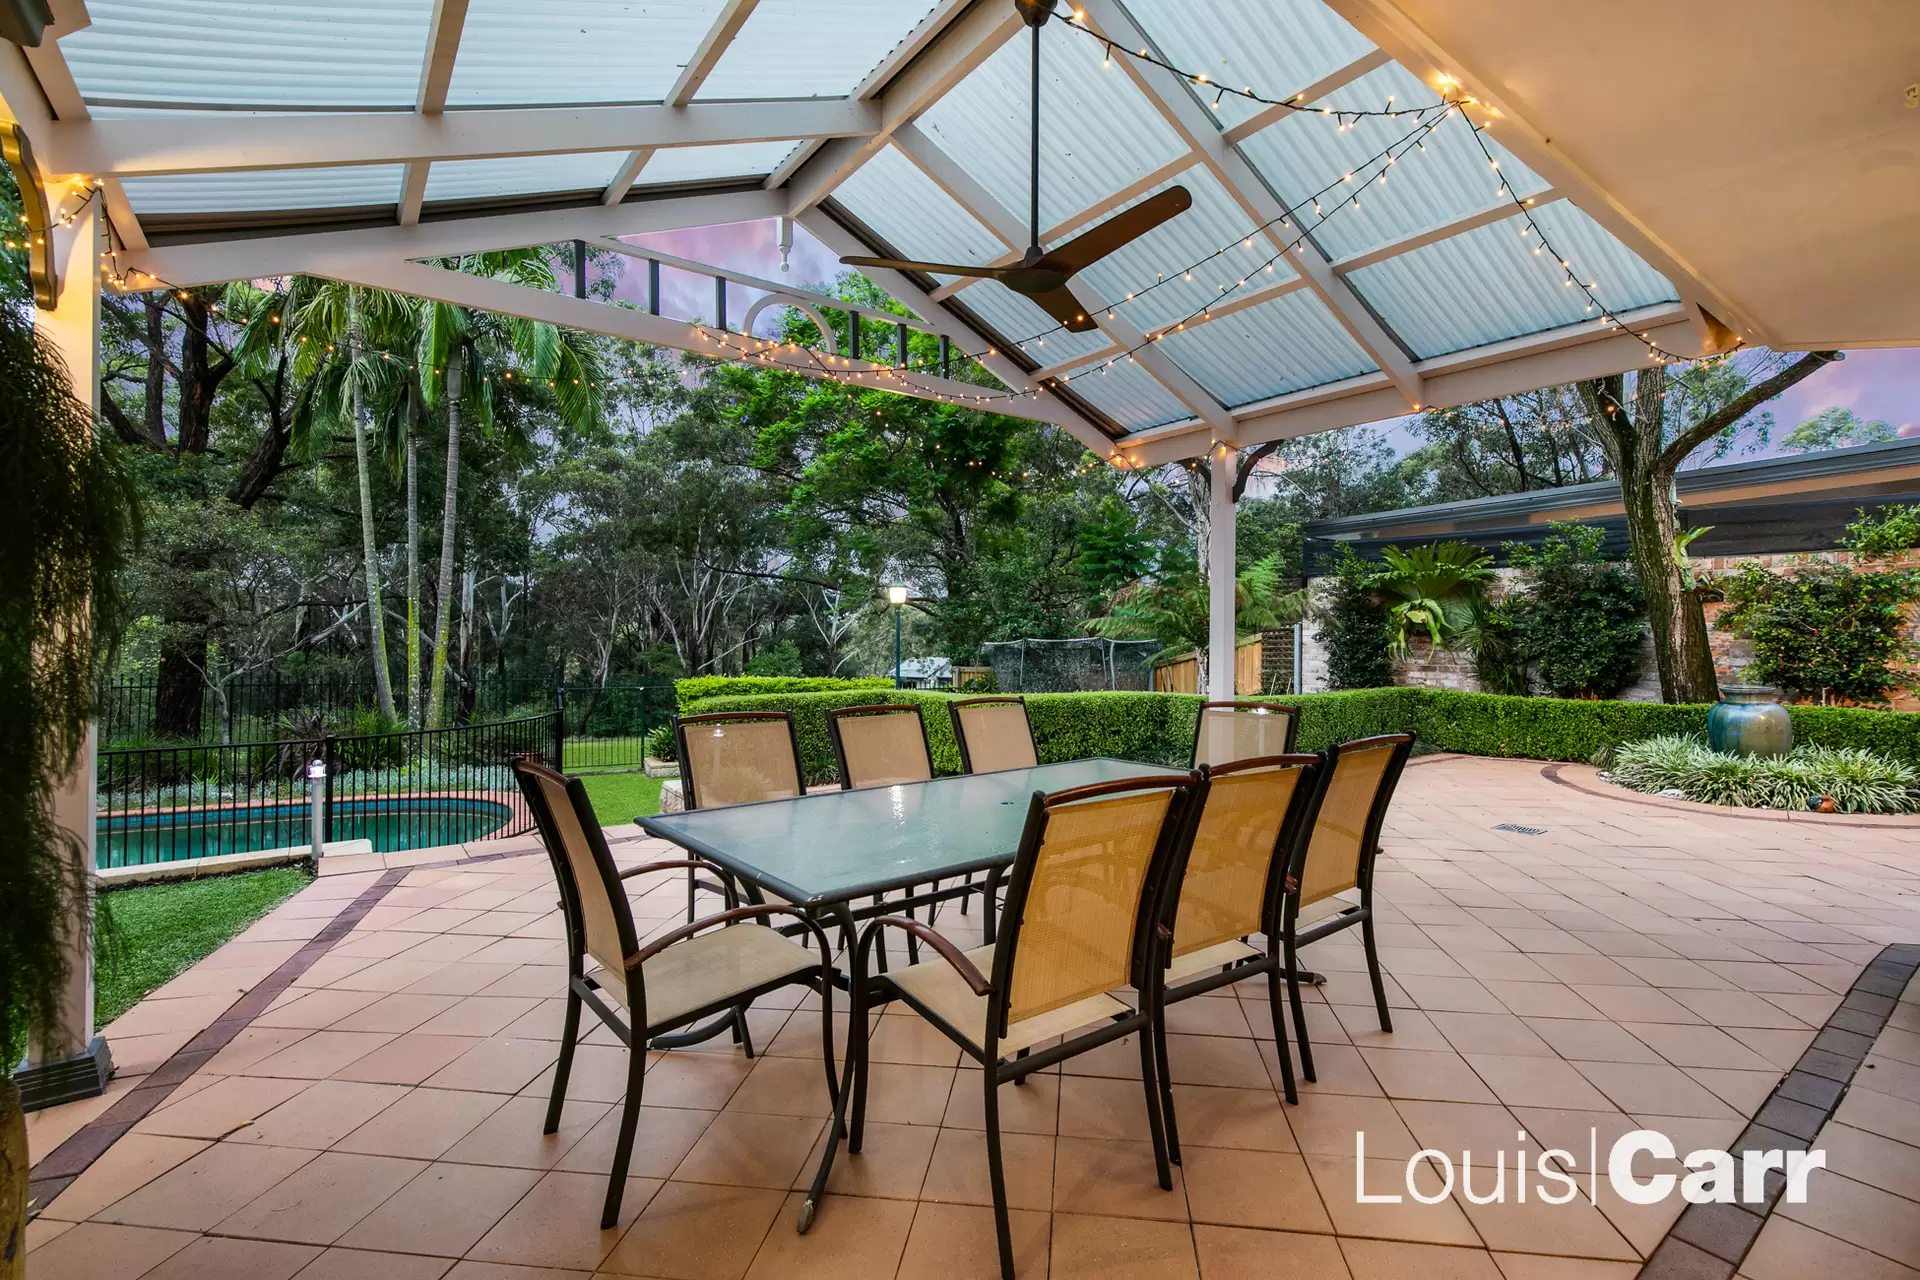 Photo #2: 15 Grangewood Place, West Pennant Hills - For Sale by Louis Carr Real Estate